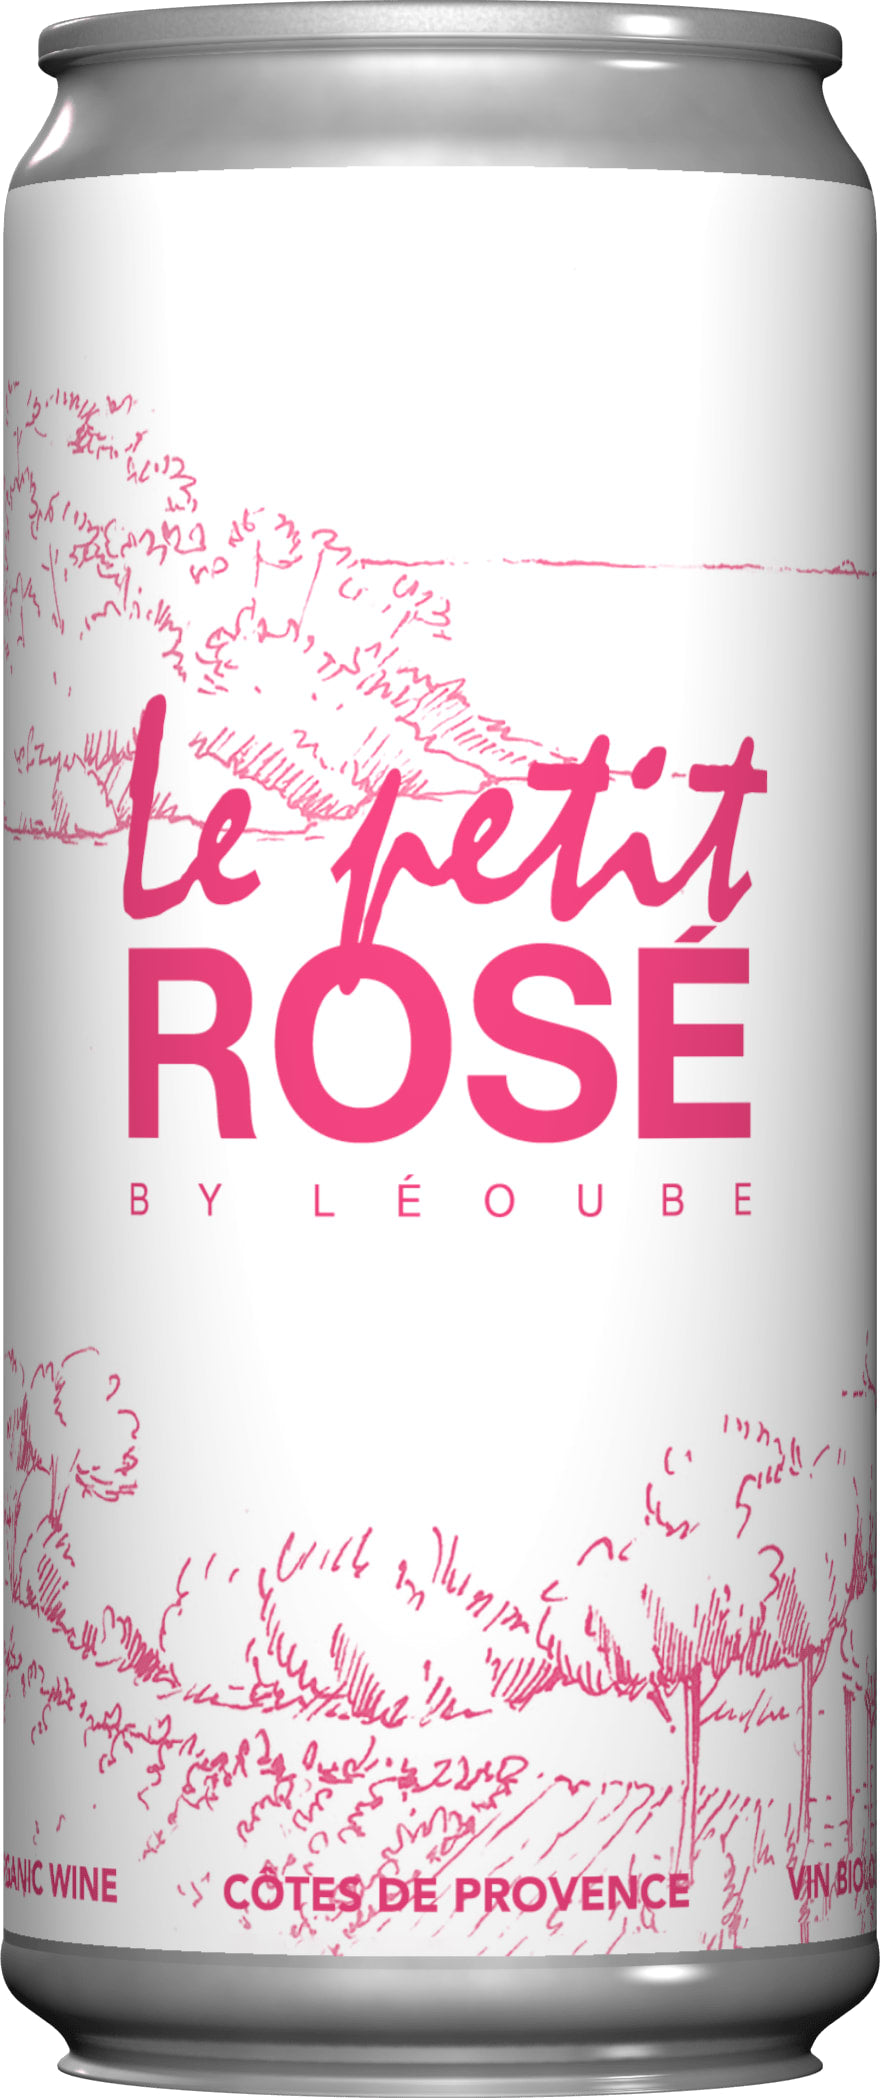 Chateau Leoube Le Petit Rose by Leoube Organic Cans 25cl NV - Buy Chateau Leoube Wines from GREAT WINES DIRECT wine shop